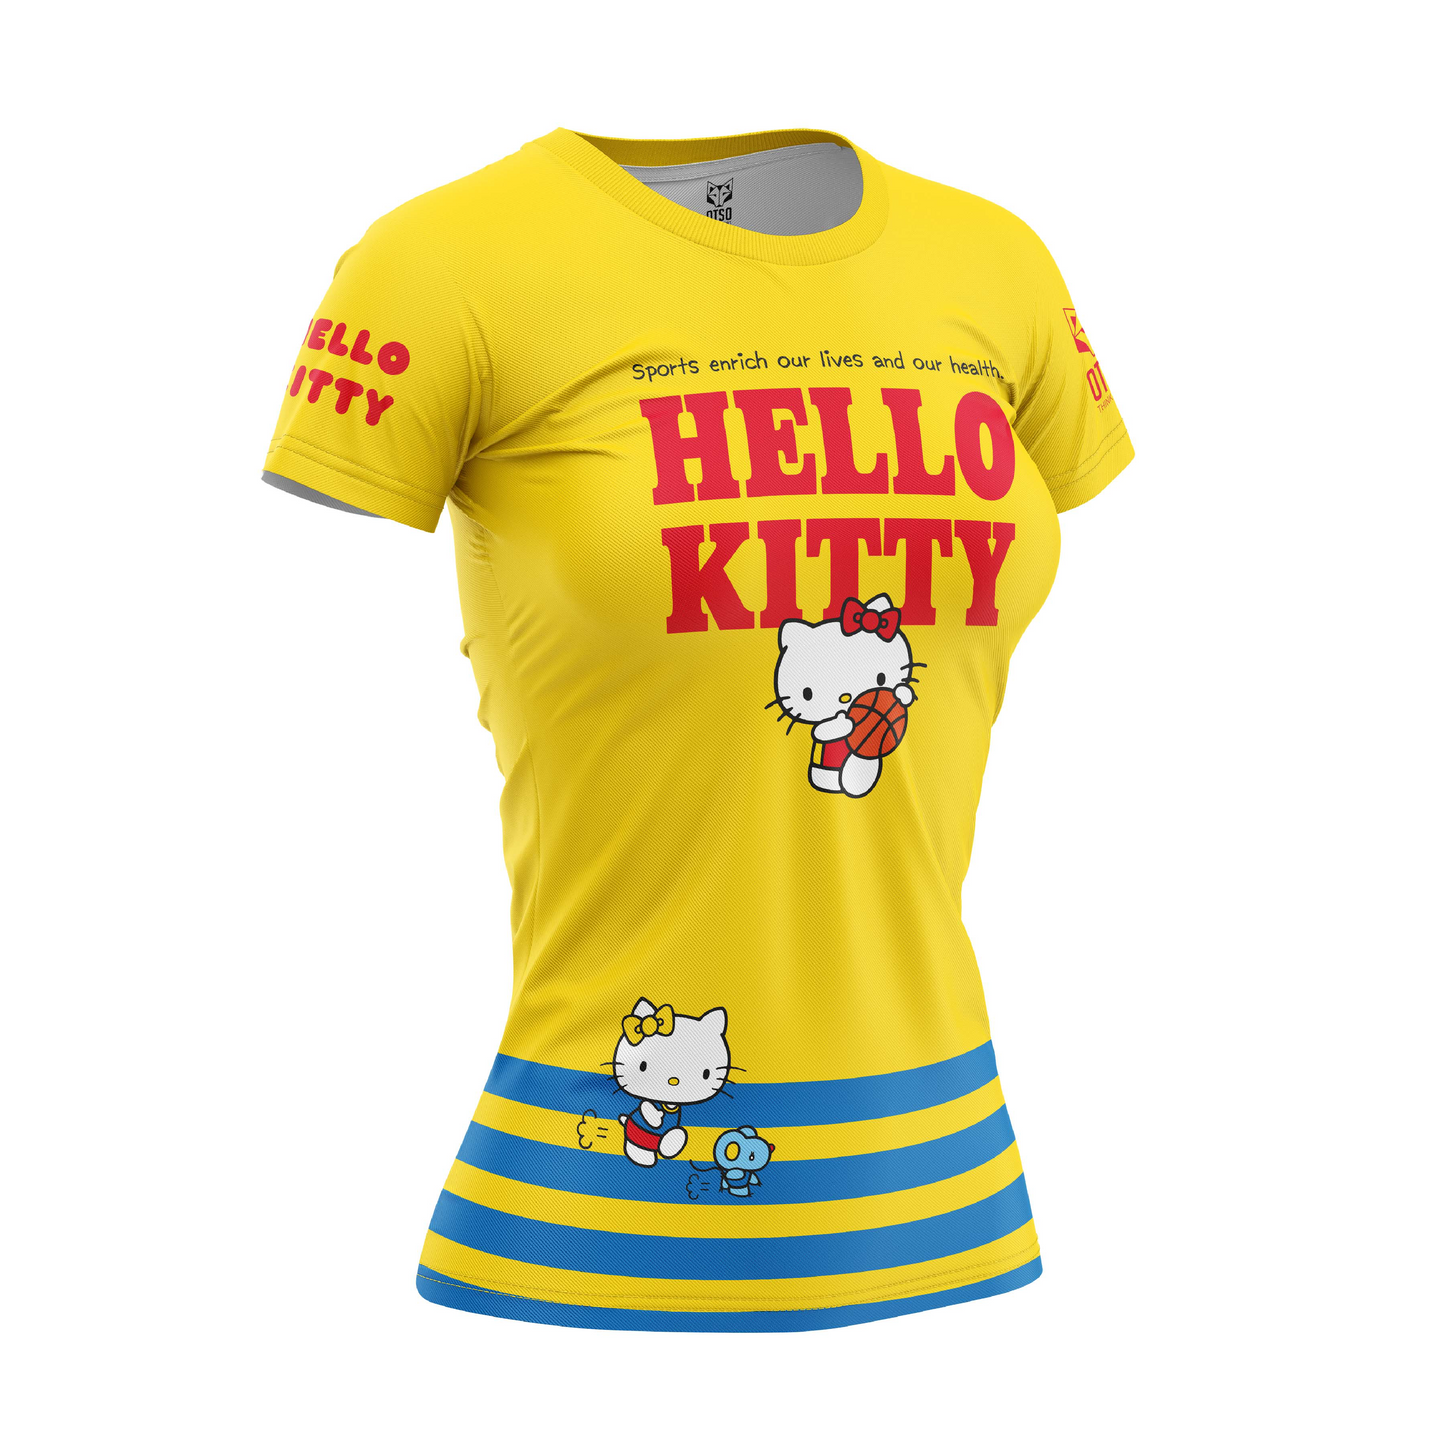 Short sleeve t-shirt for girls and women - Hello Kitty Sports